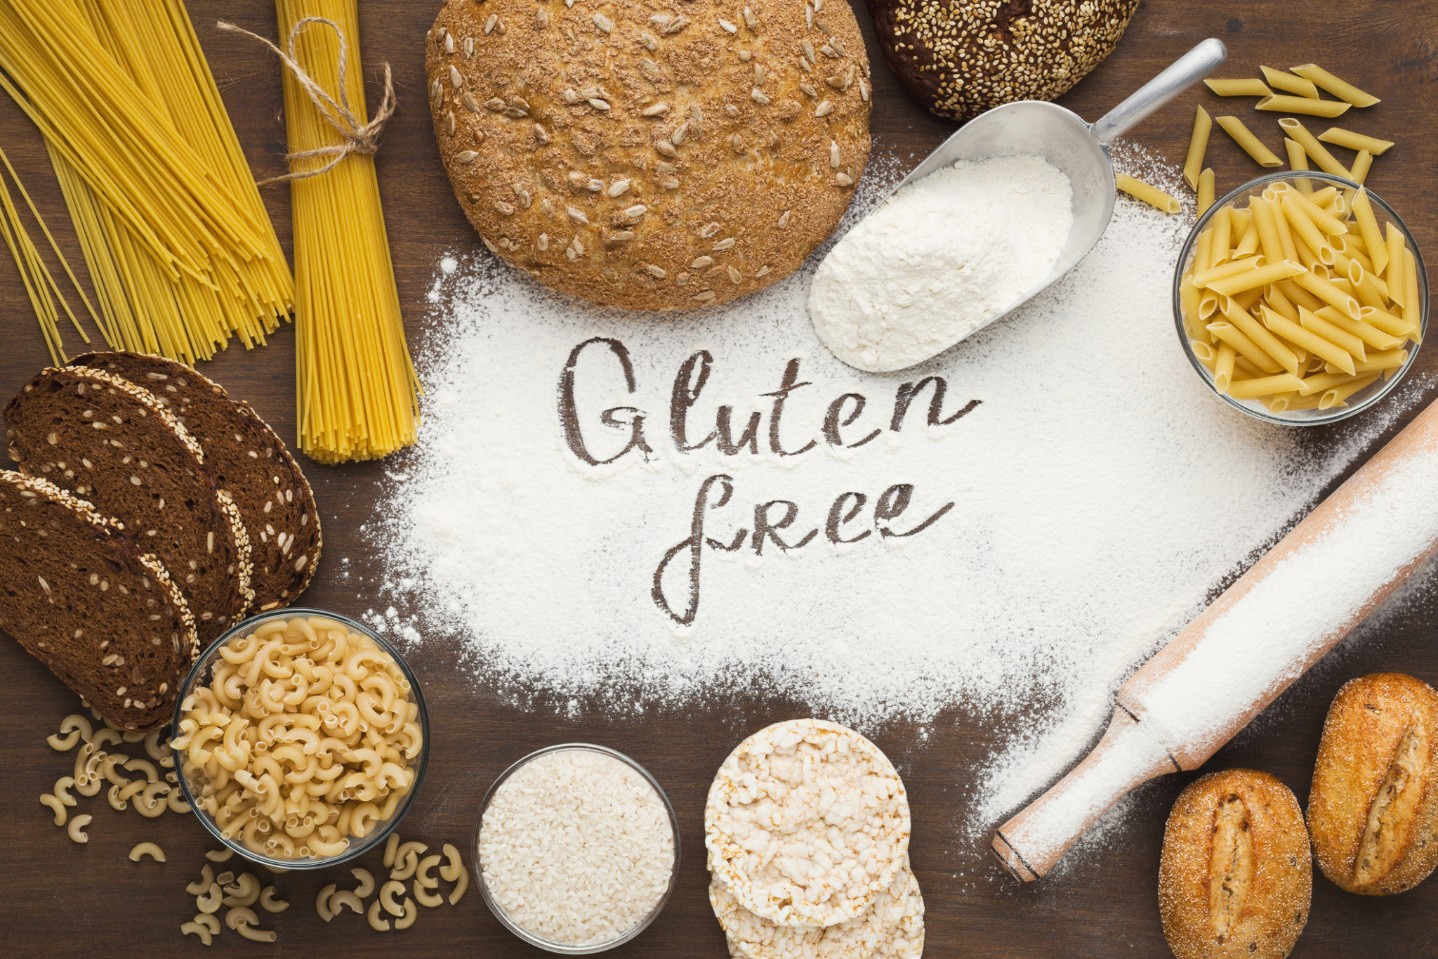 Gluten free inscription and various healthy products